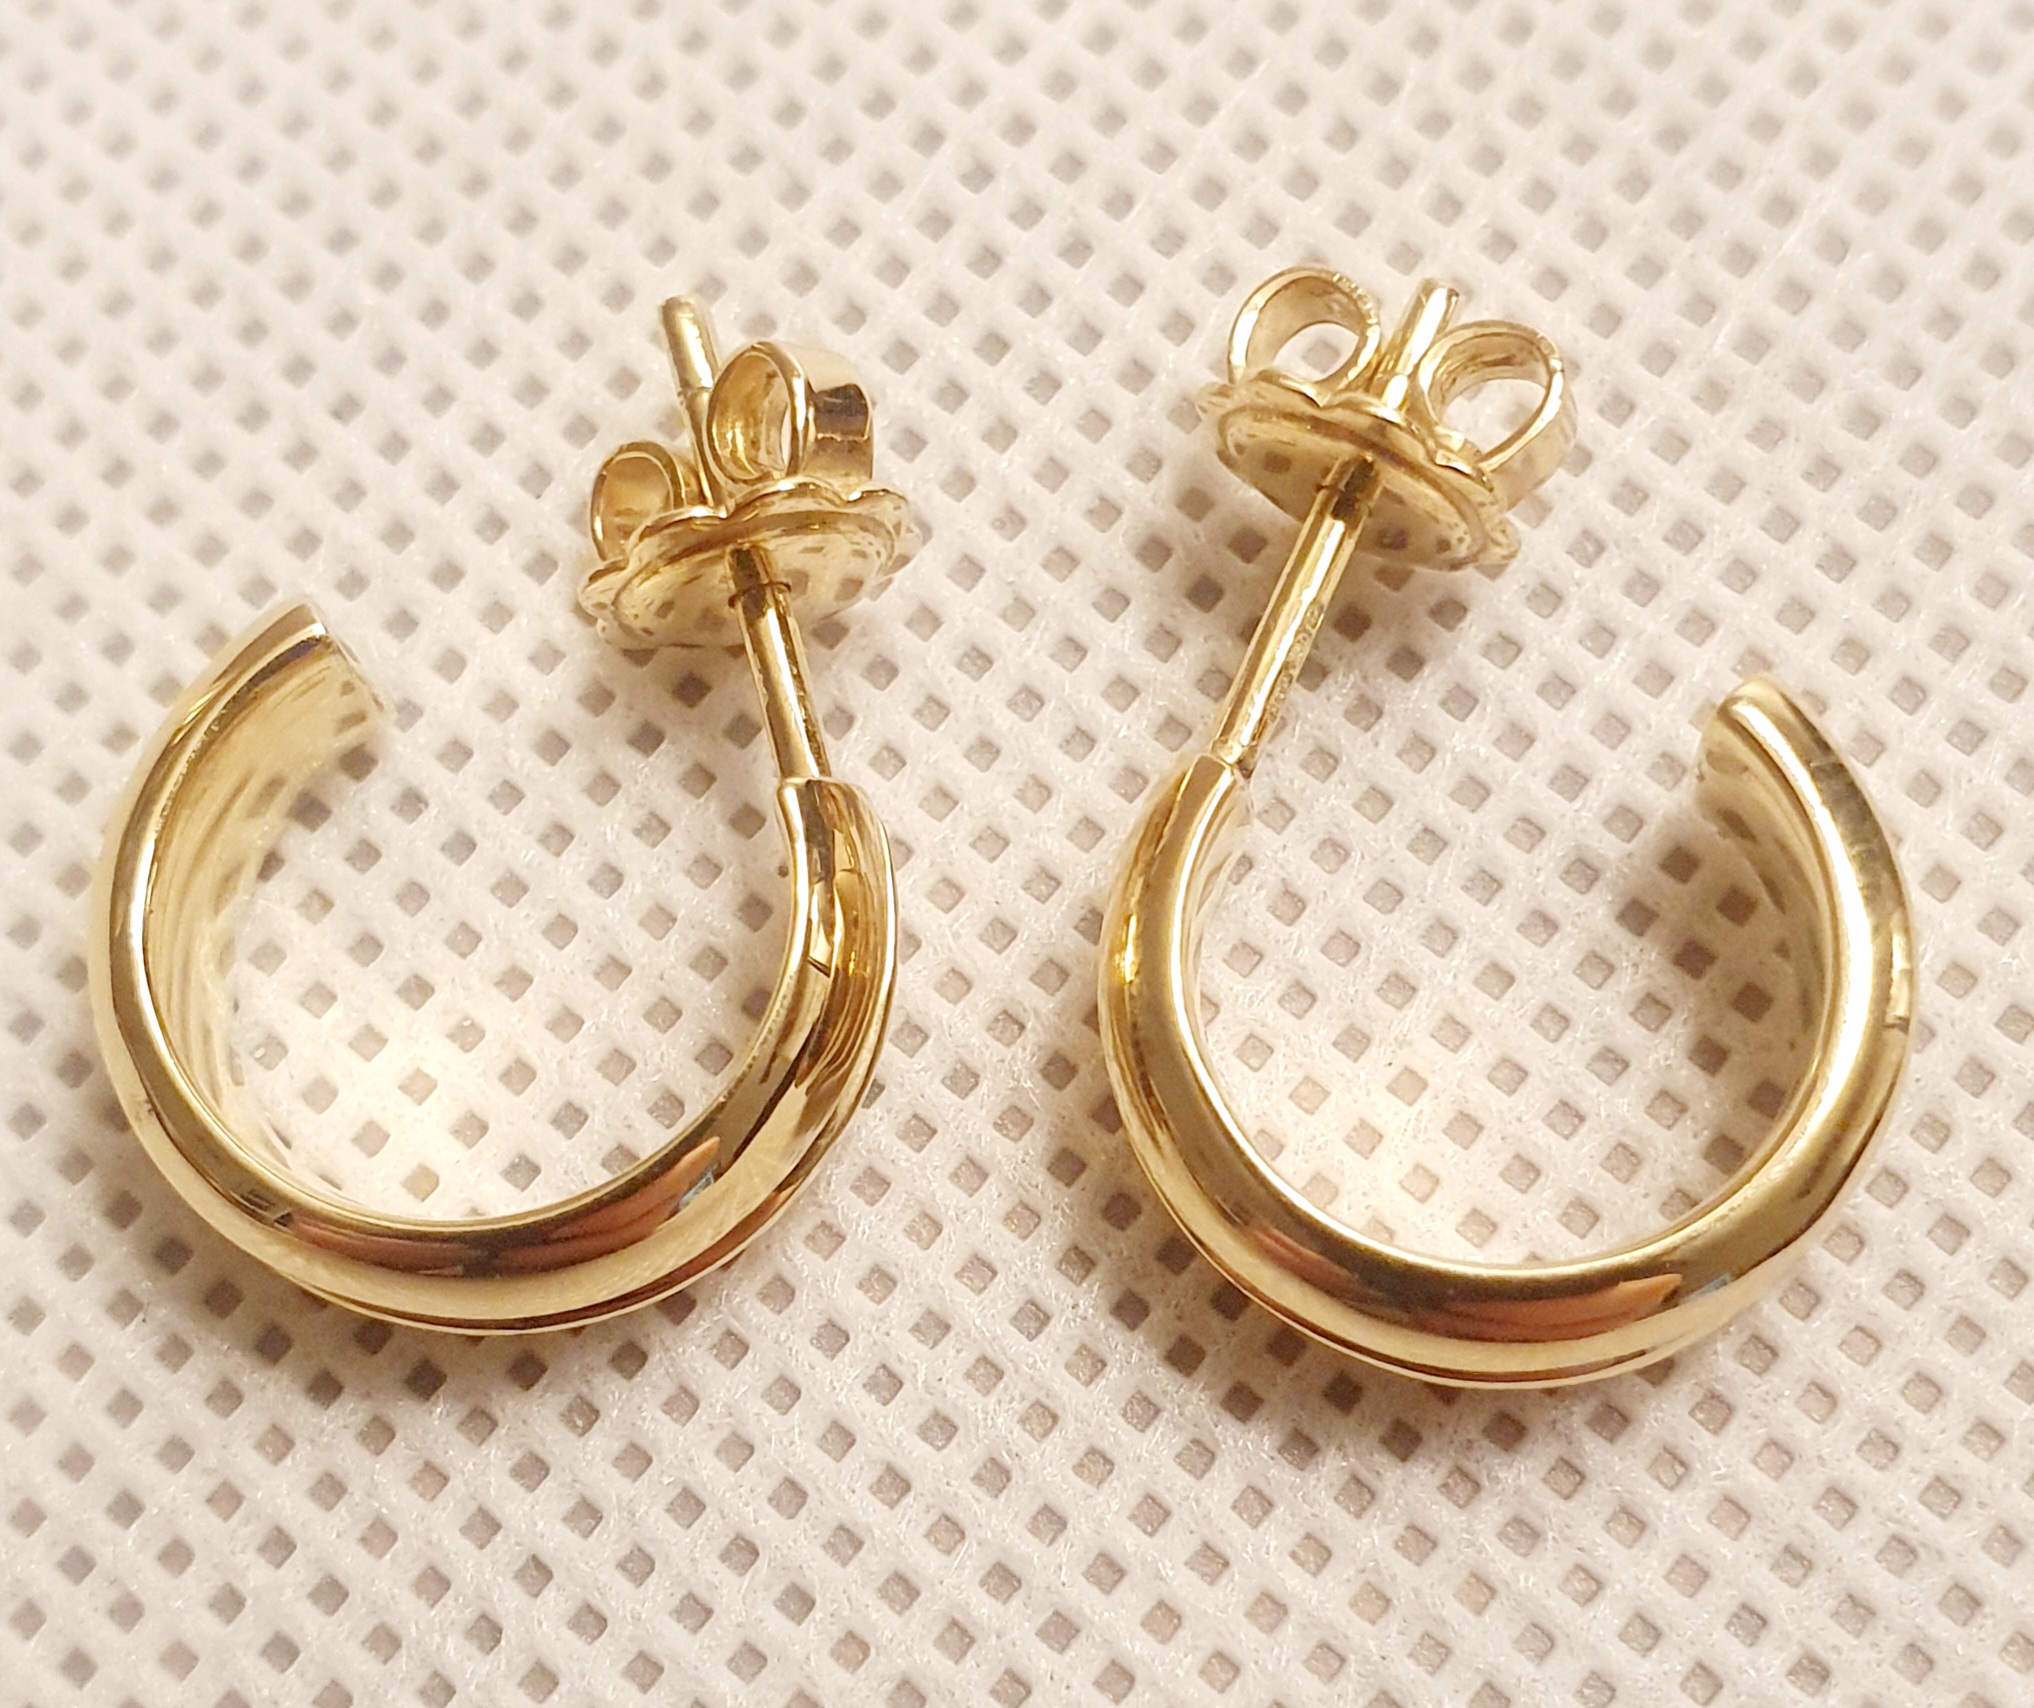 Pair of 18ct Gold Earrings, weight 7.35g